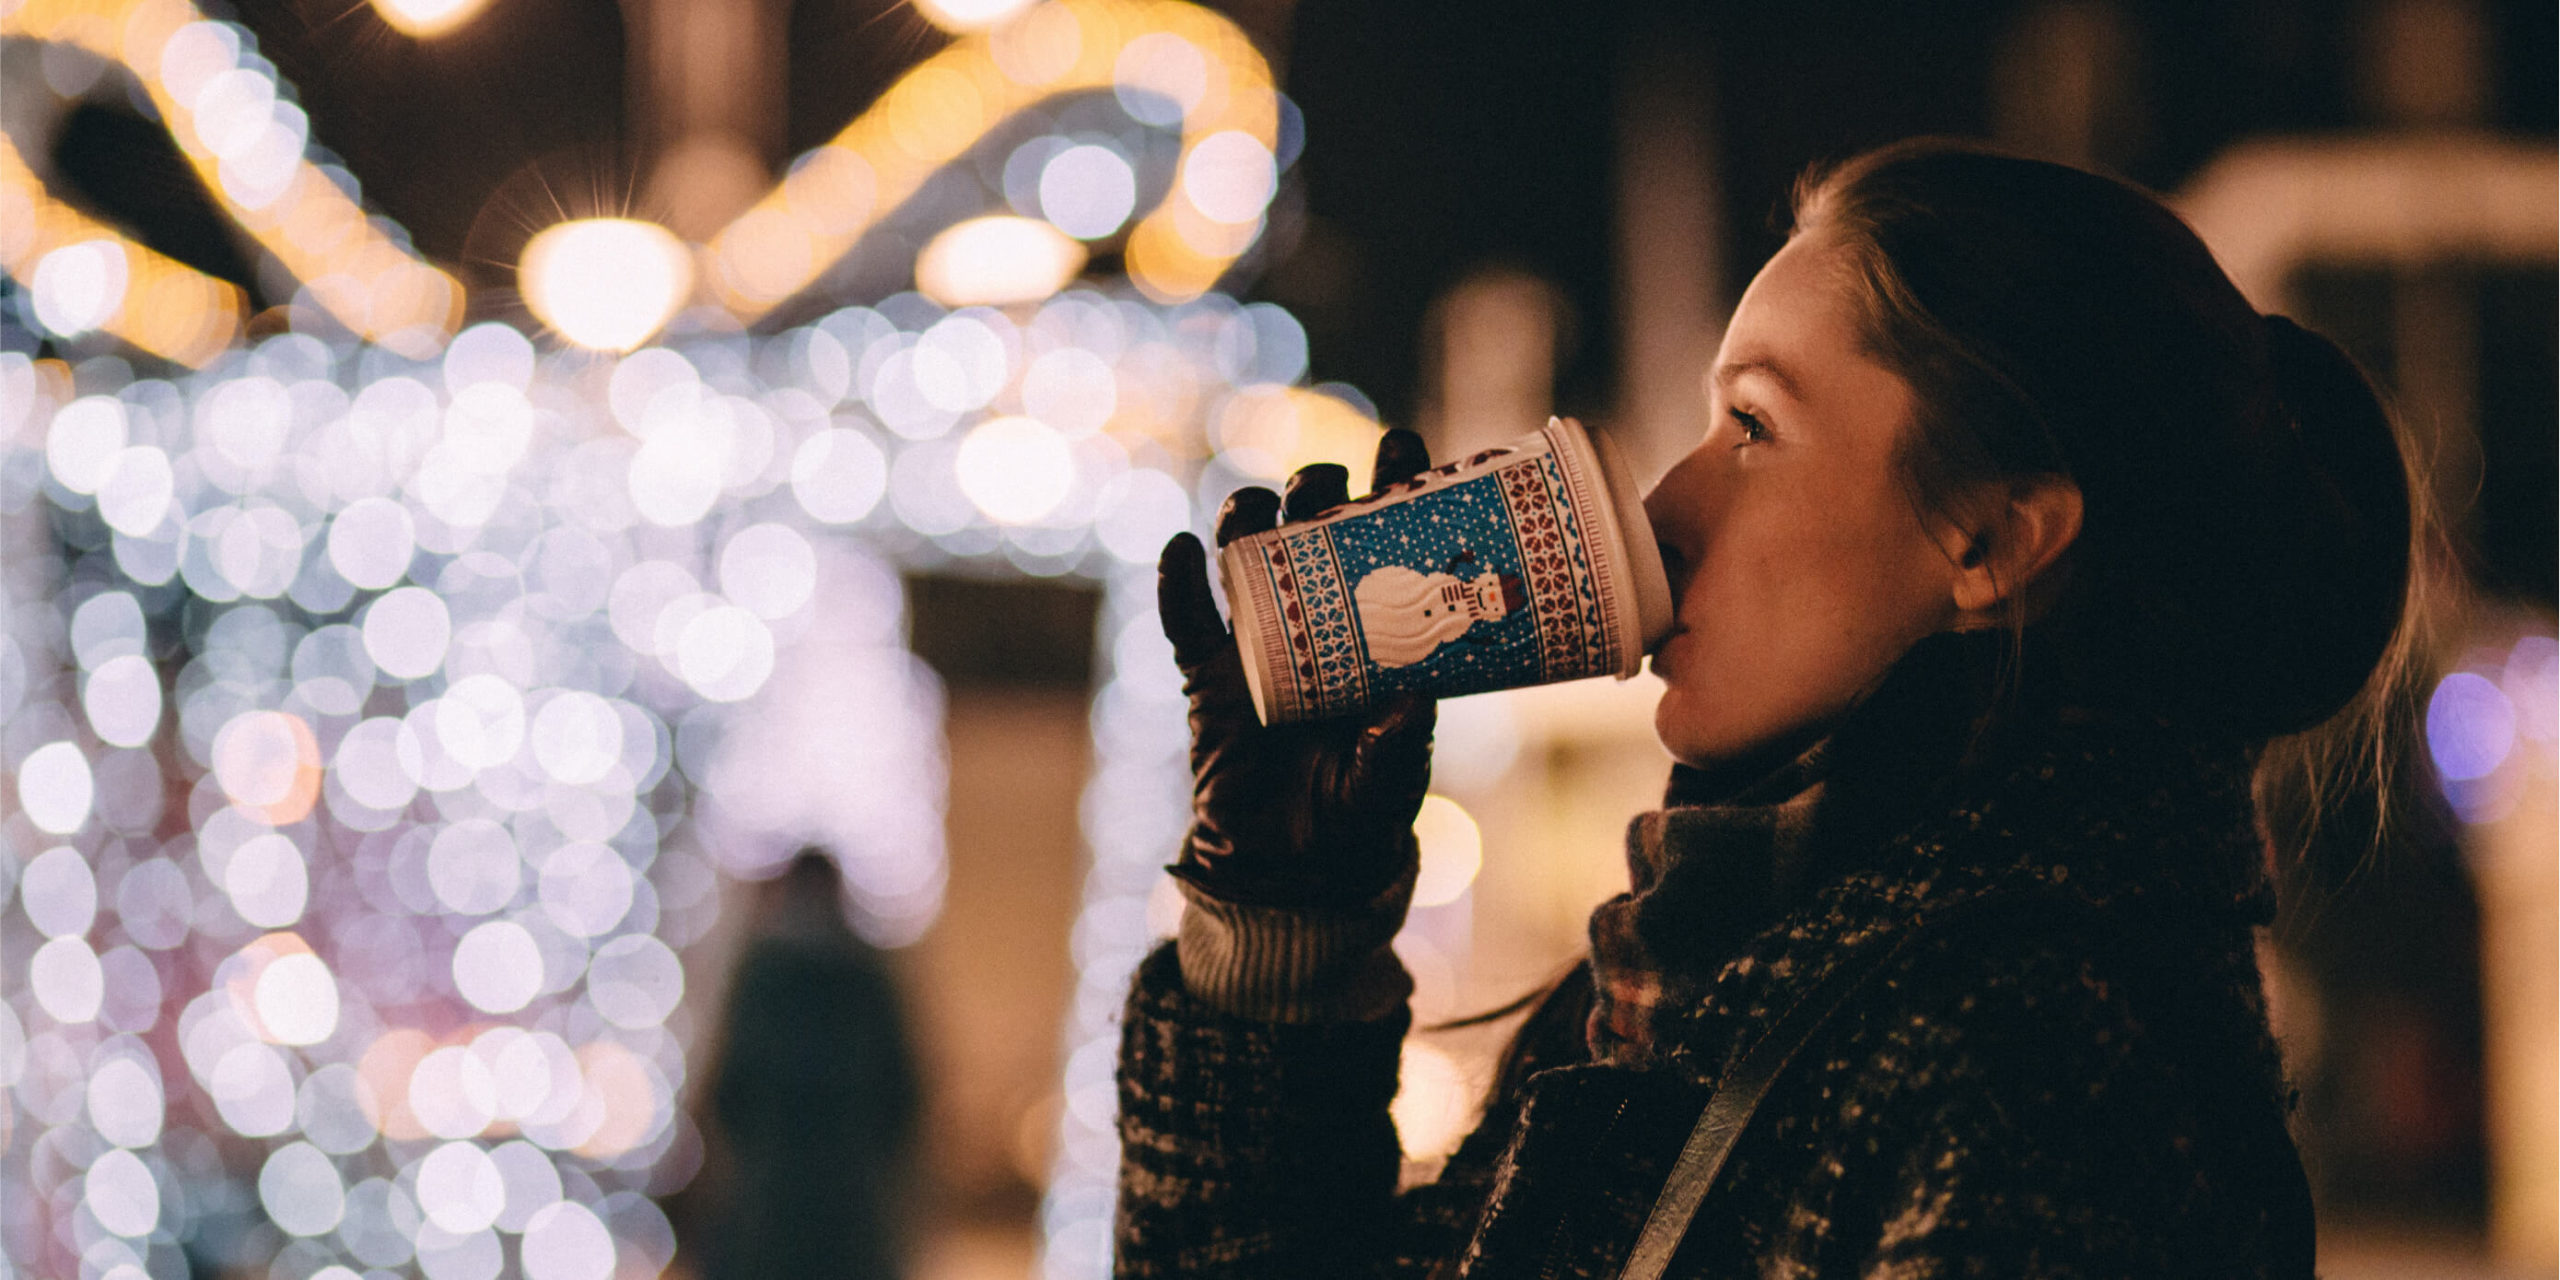 Woman drinking coffee surrounded by outdoor holiday lights.